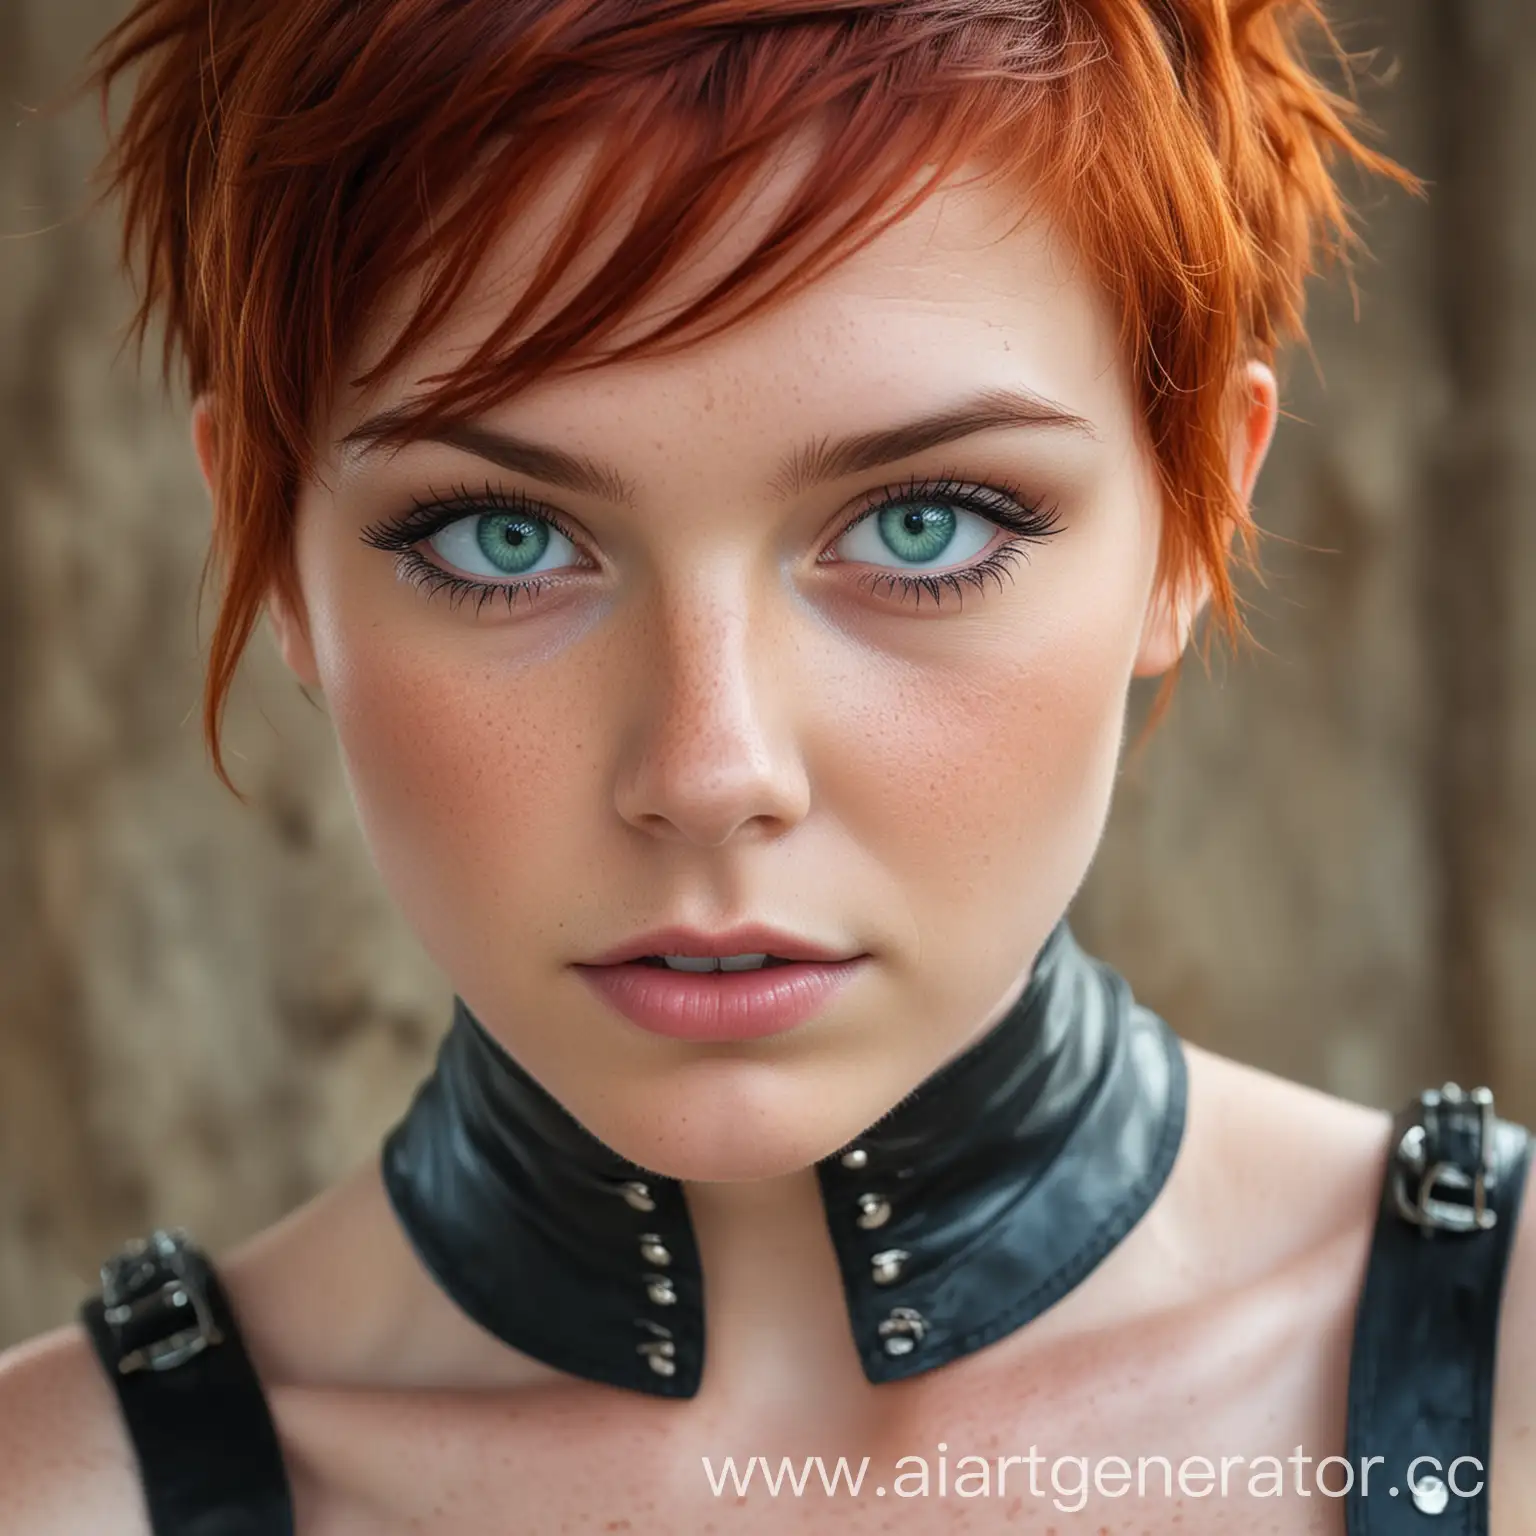 RedHaired-Pixie-Girl-in-Leather-Corset-with-Turquoise-Eyes-and-Freckles